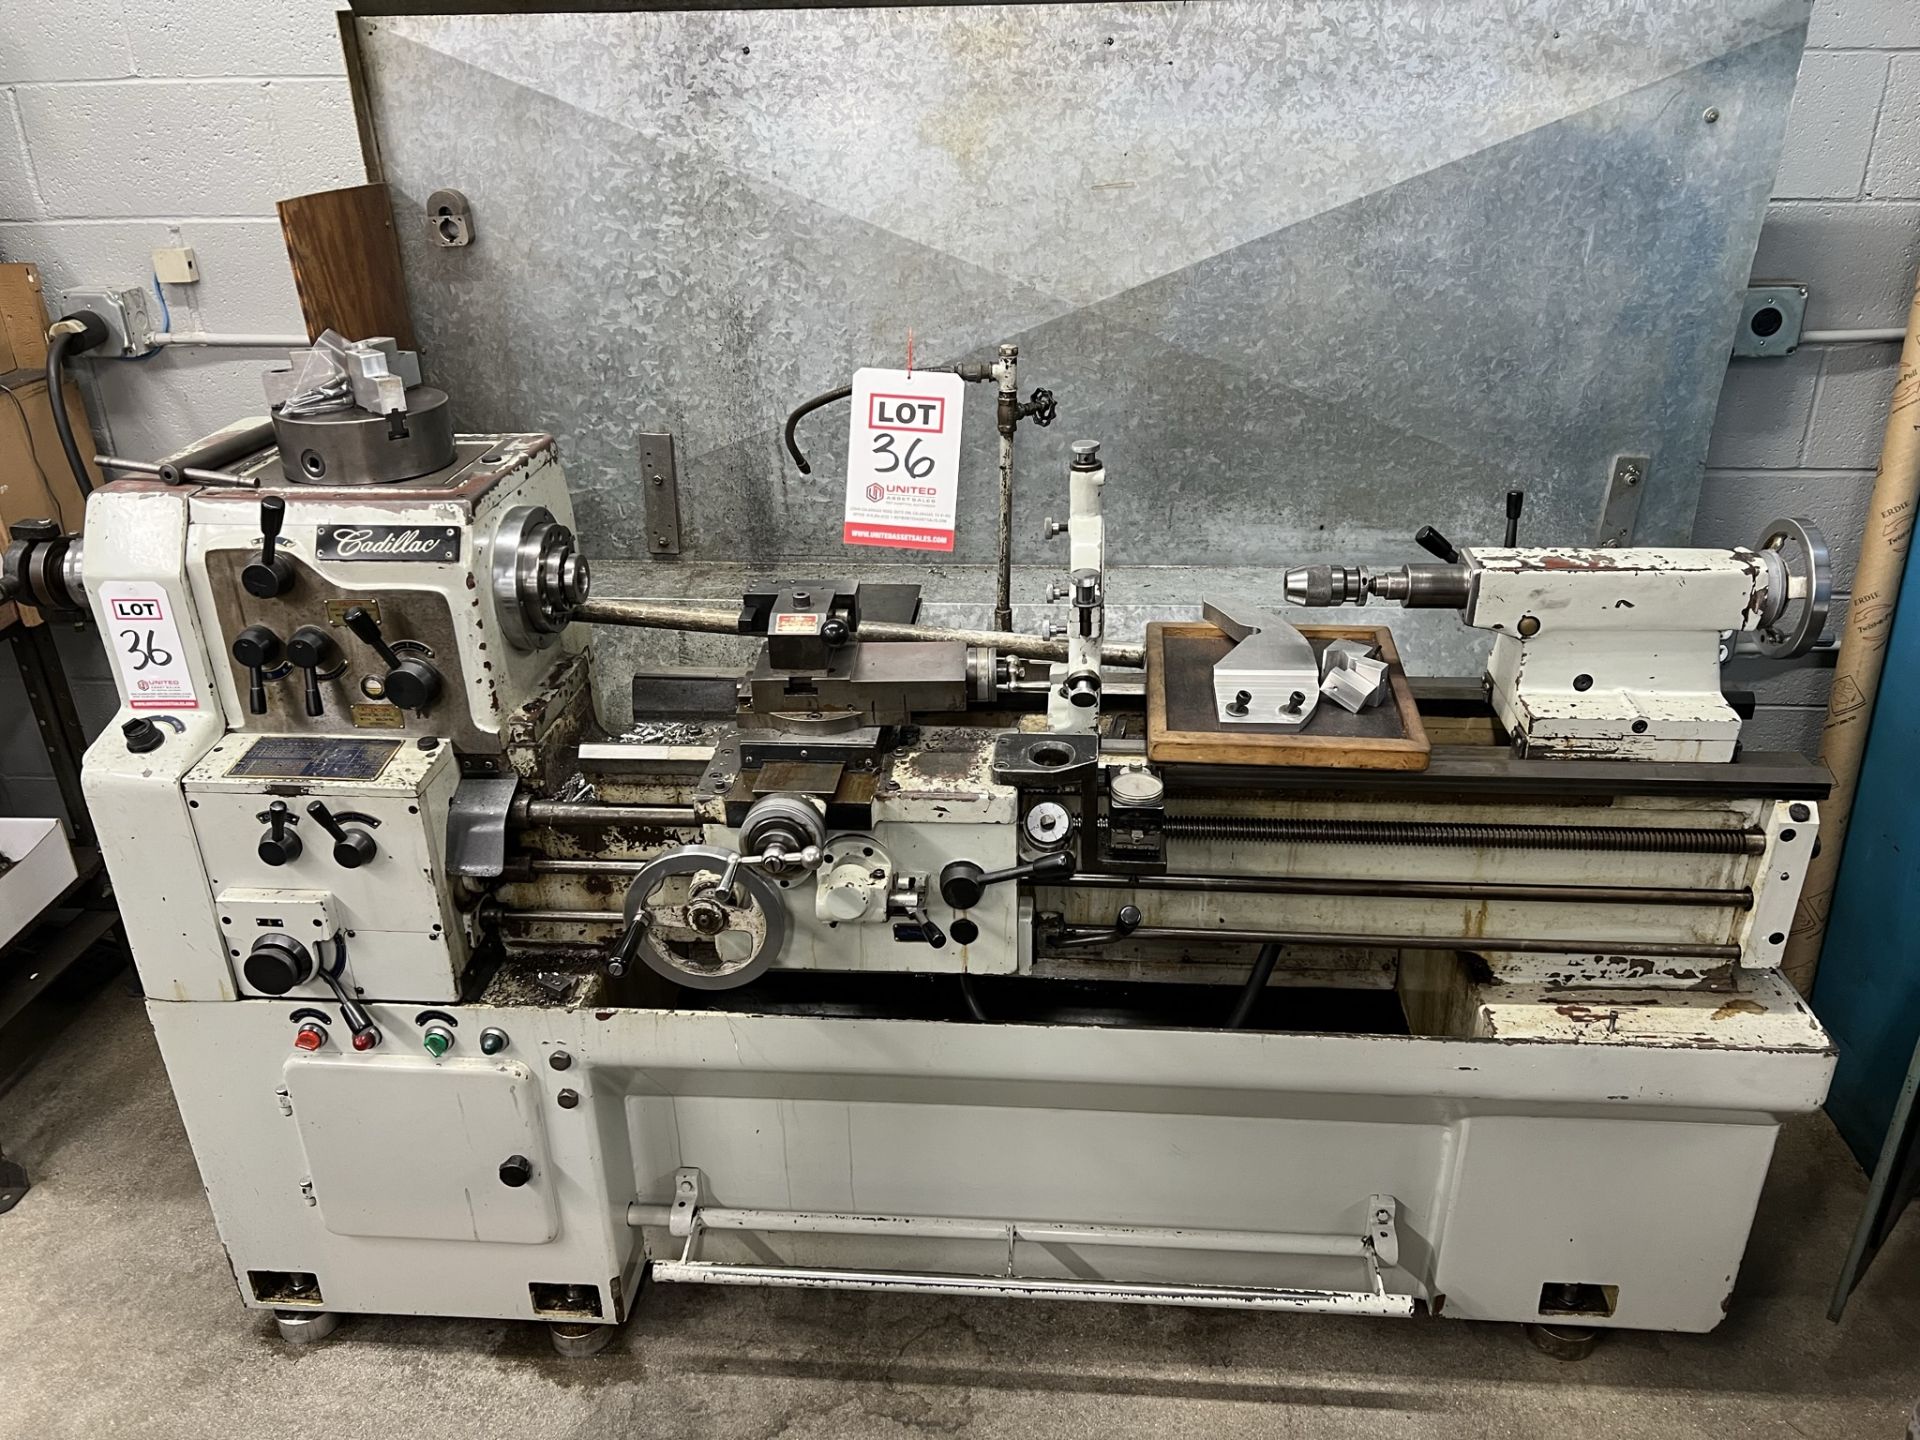 CADILLAC LATHE, MODEL 1440G, 14" X 40" CC, W/ 8" 3-JAW CHUCK, STEADY REST TAILSTOCK, LEVER STYLE